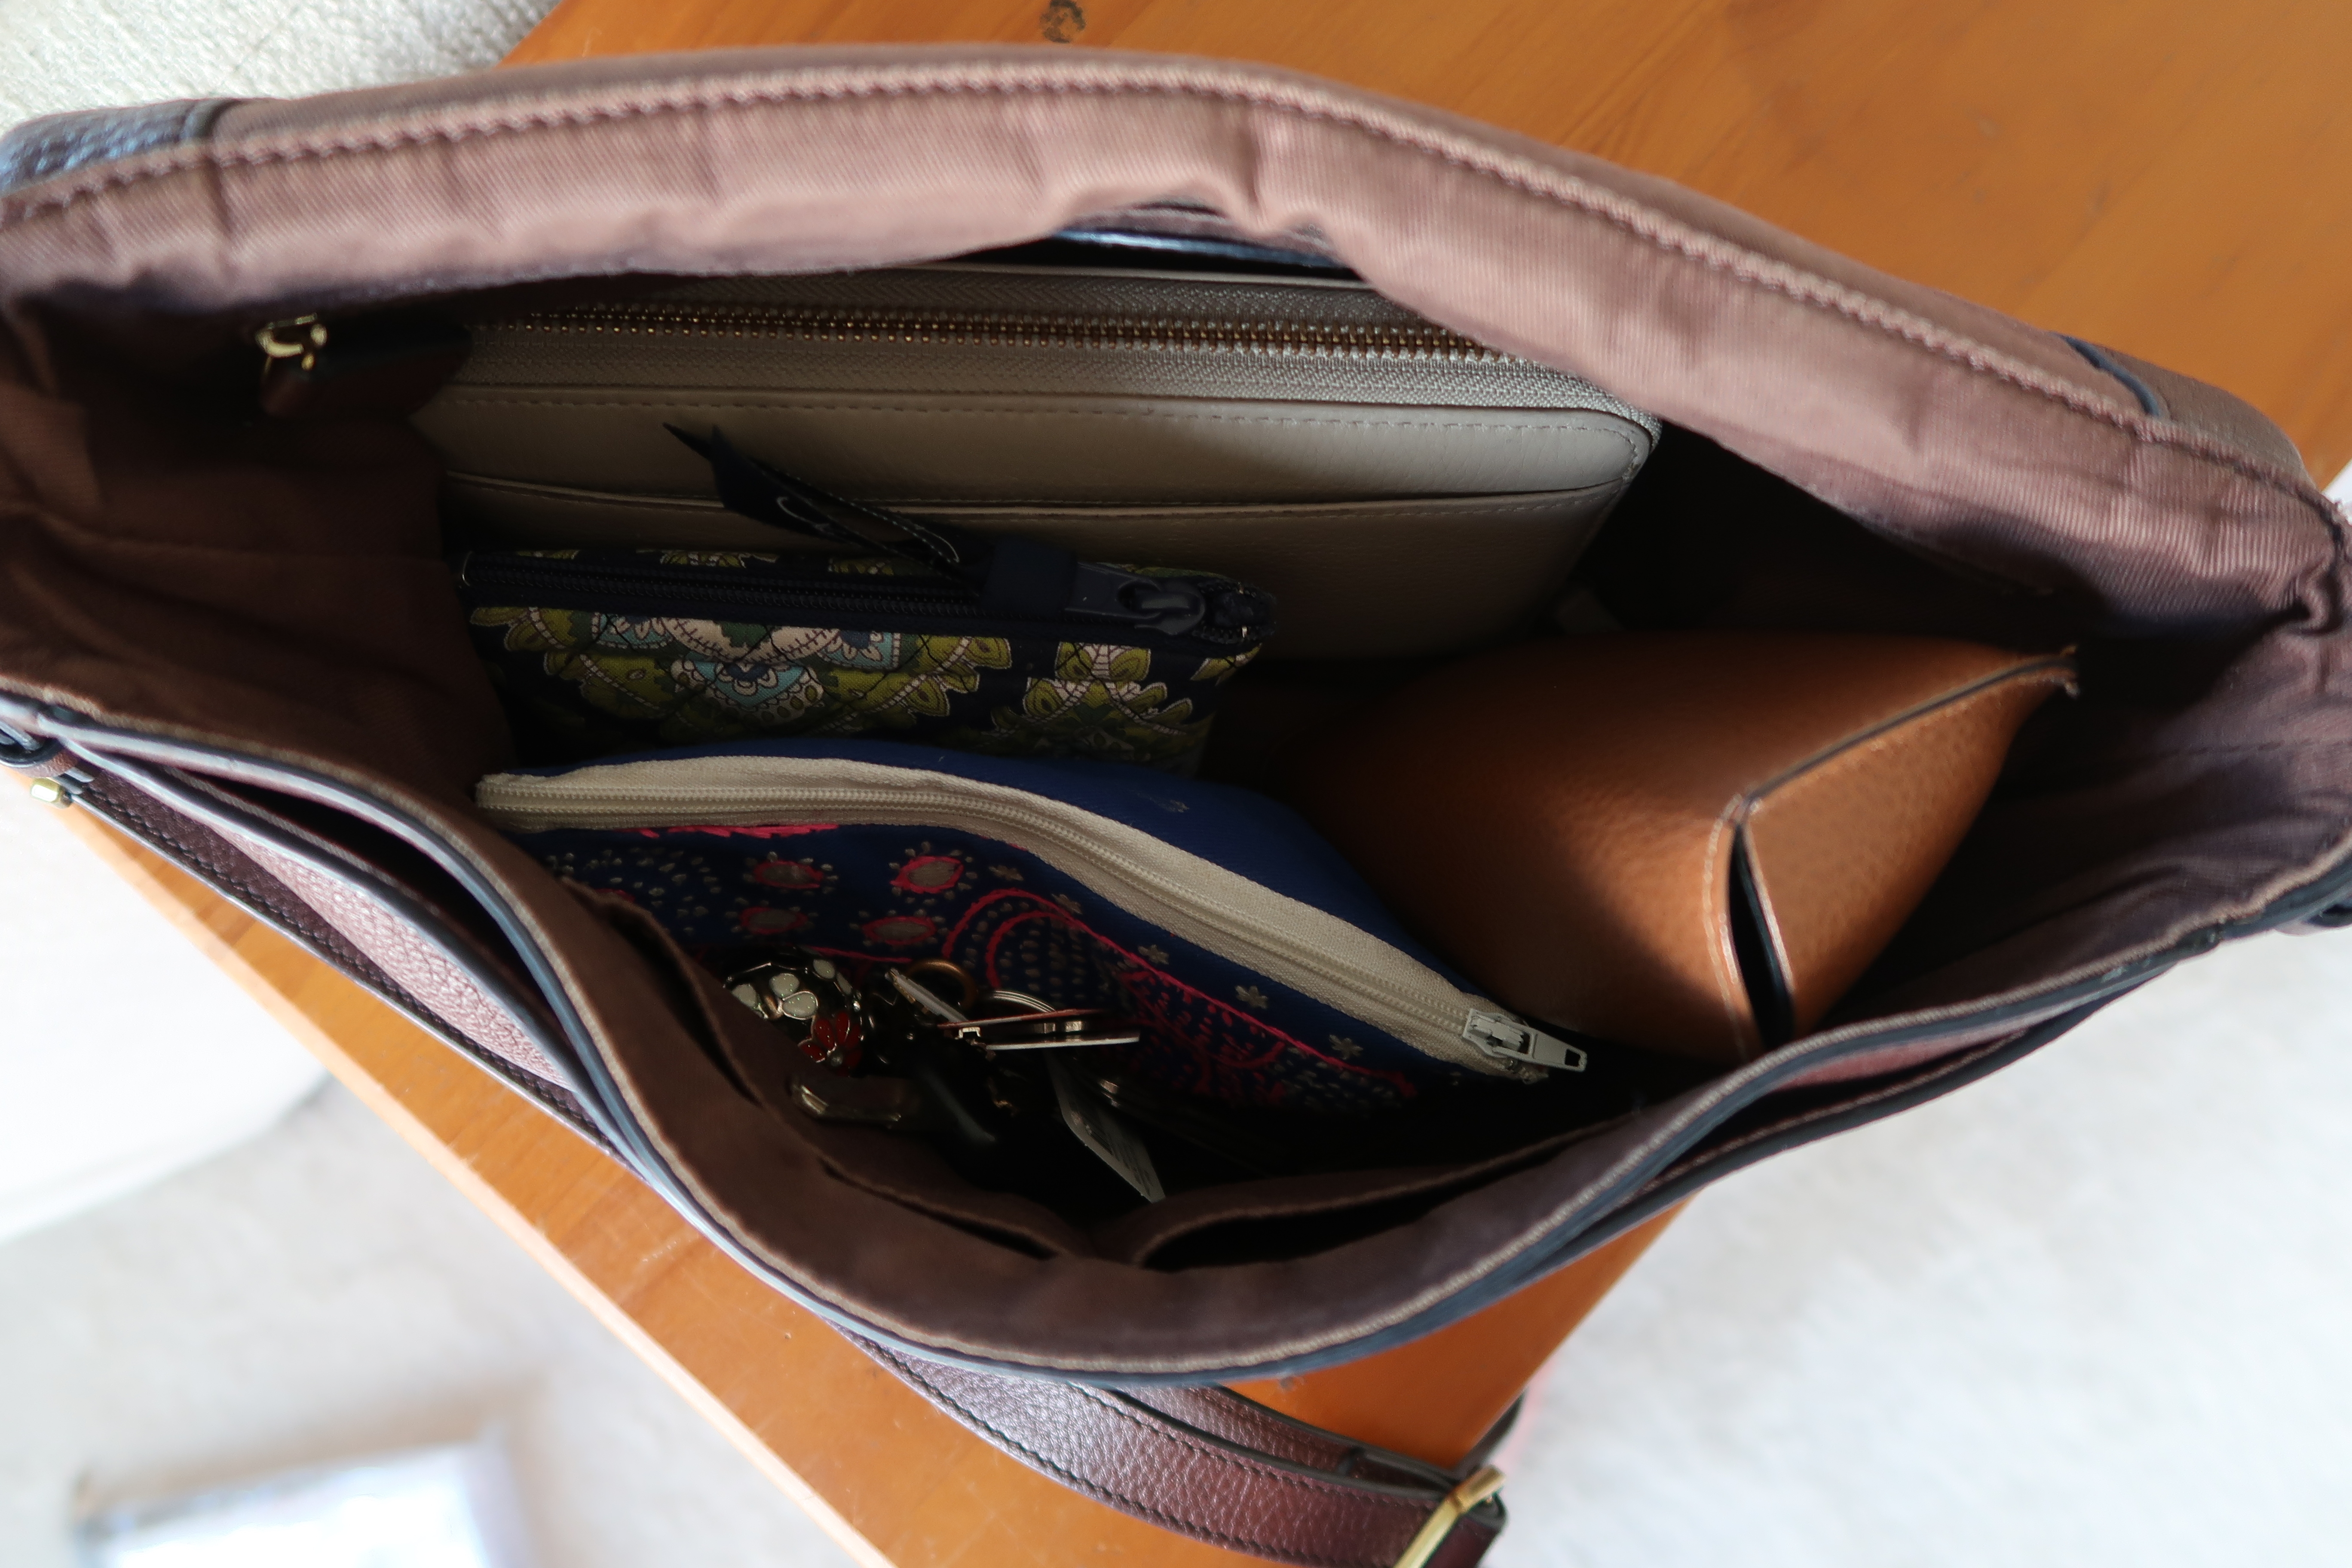 What's In My Purse | BlairBlogs.com